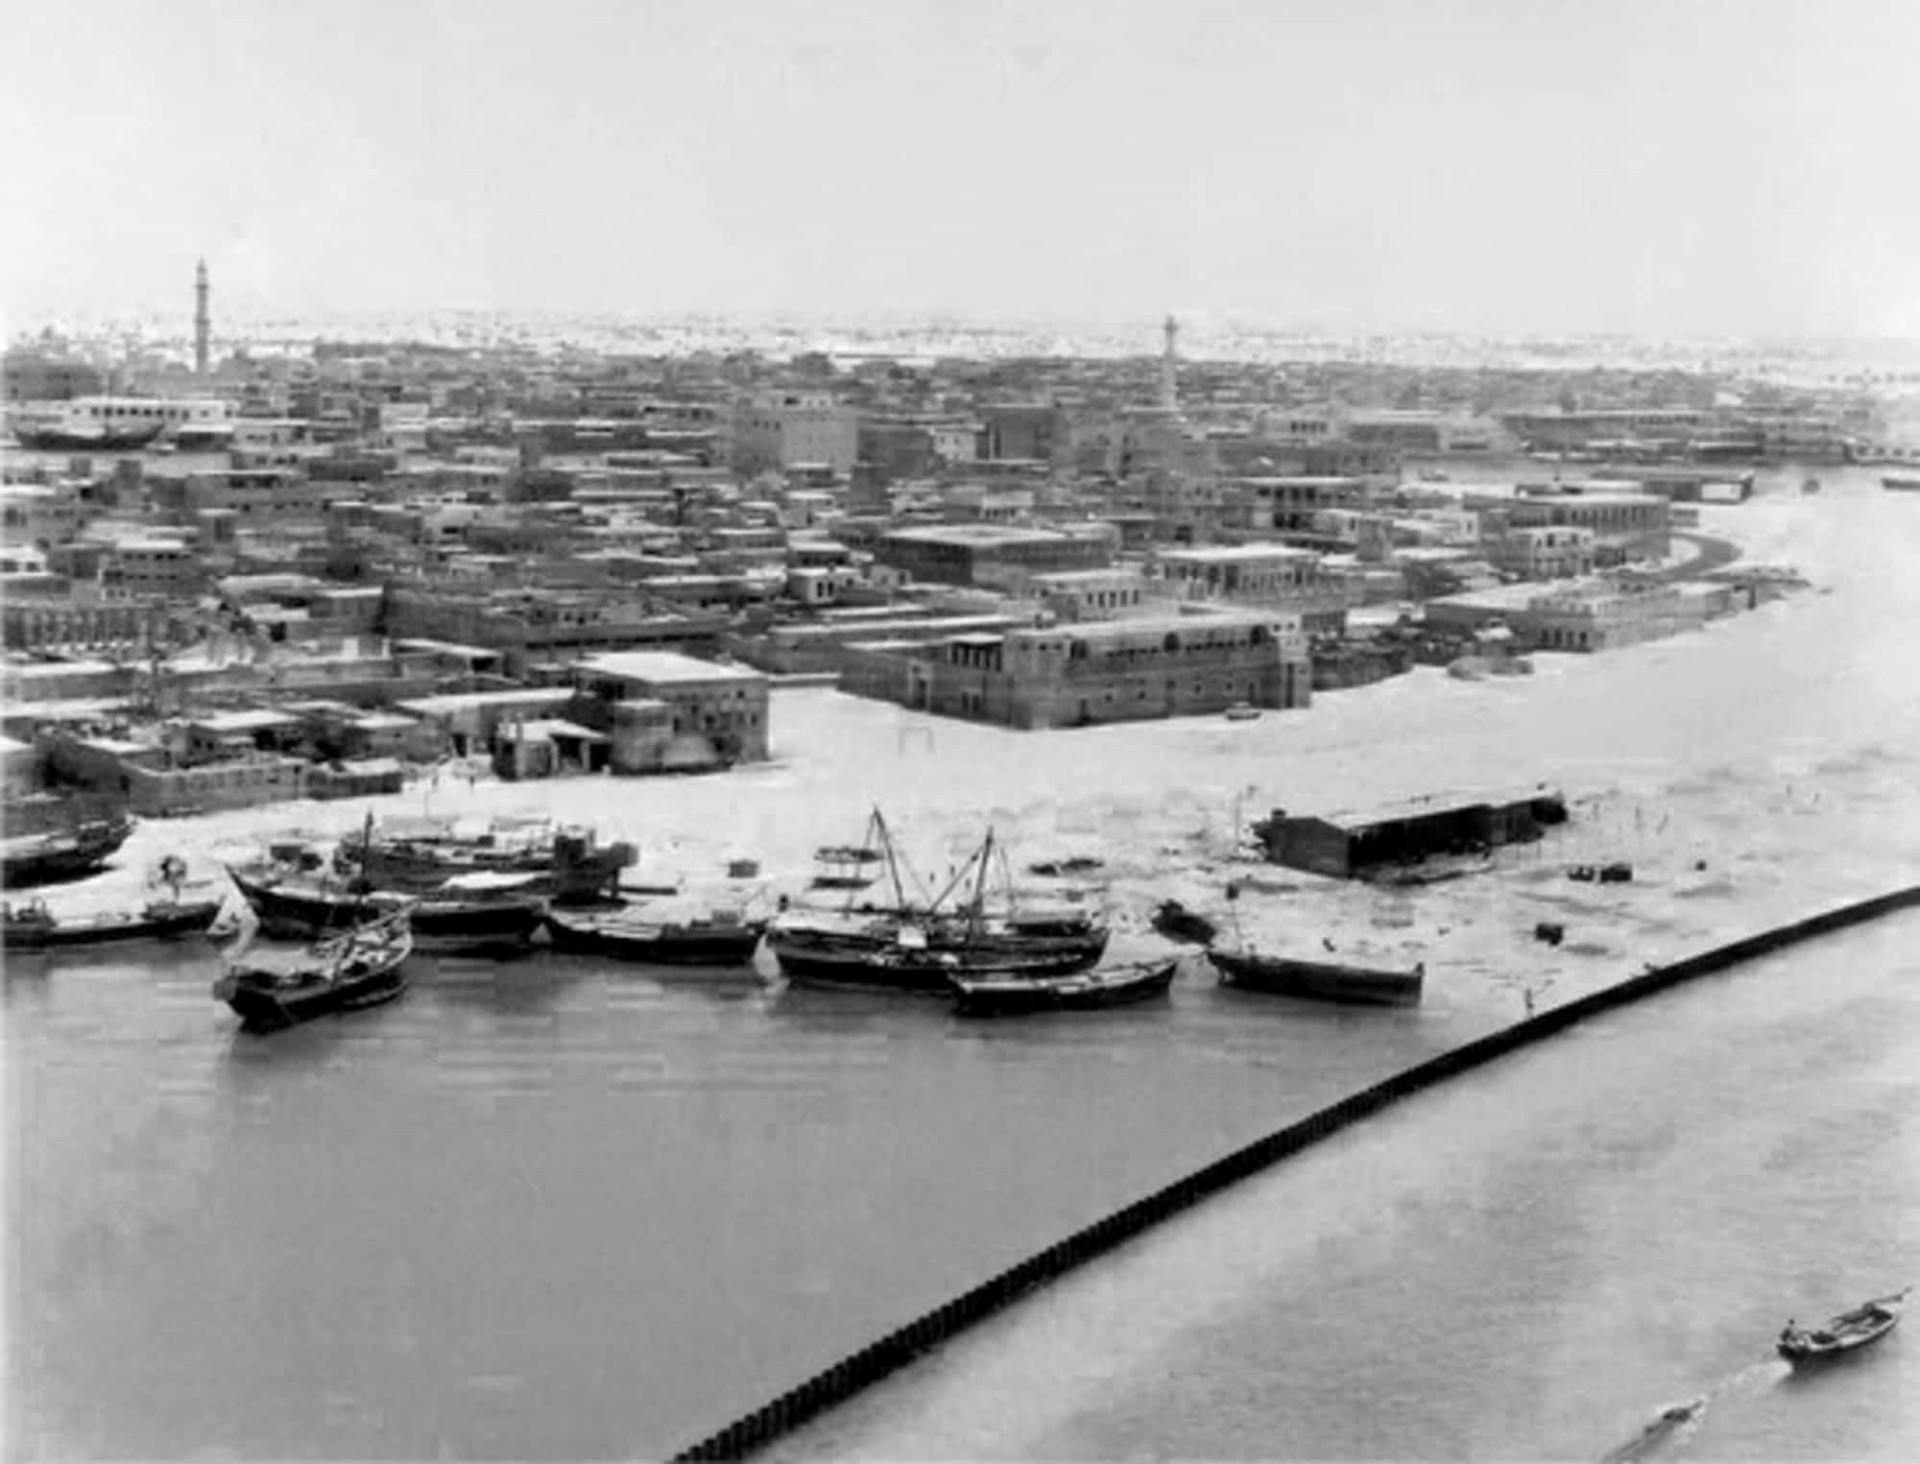 Dubai is one of the world's newest cities. Here's a photo taken in the mid '60s, showing the Al Ras district and Dubai's saltwater creek.<p><a href="https://www.msn.com/en-us/community/channel/vid-7xx8mnucu55yw63we9va2gwr7uihbxwc68fxqp25x6tg4ftibpra?cvid=94631541bc0f4f89bfd59158d696ad7e">Follow us and access great exclusive content every day</a></p>